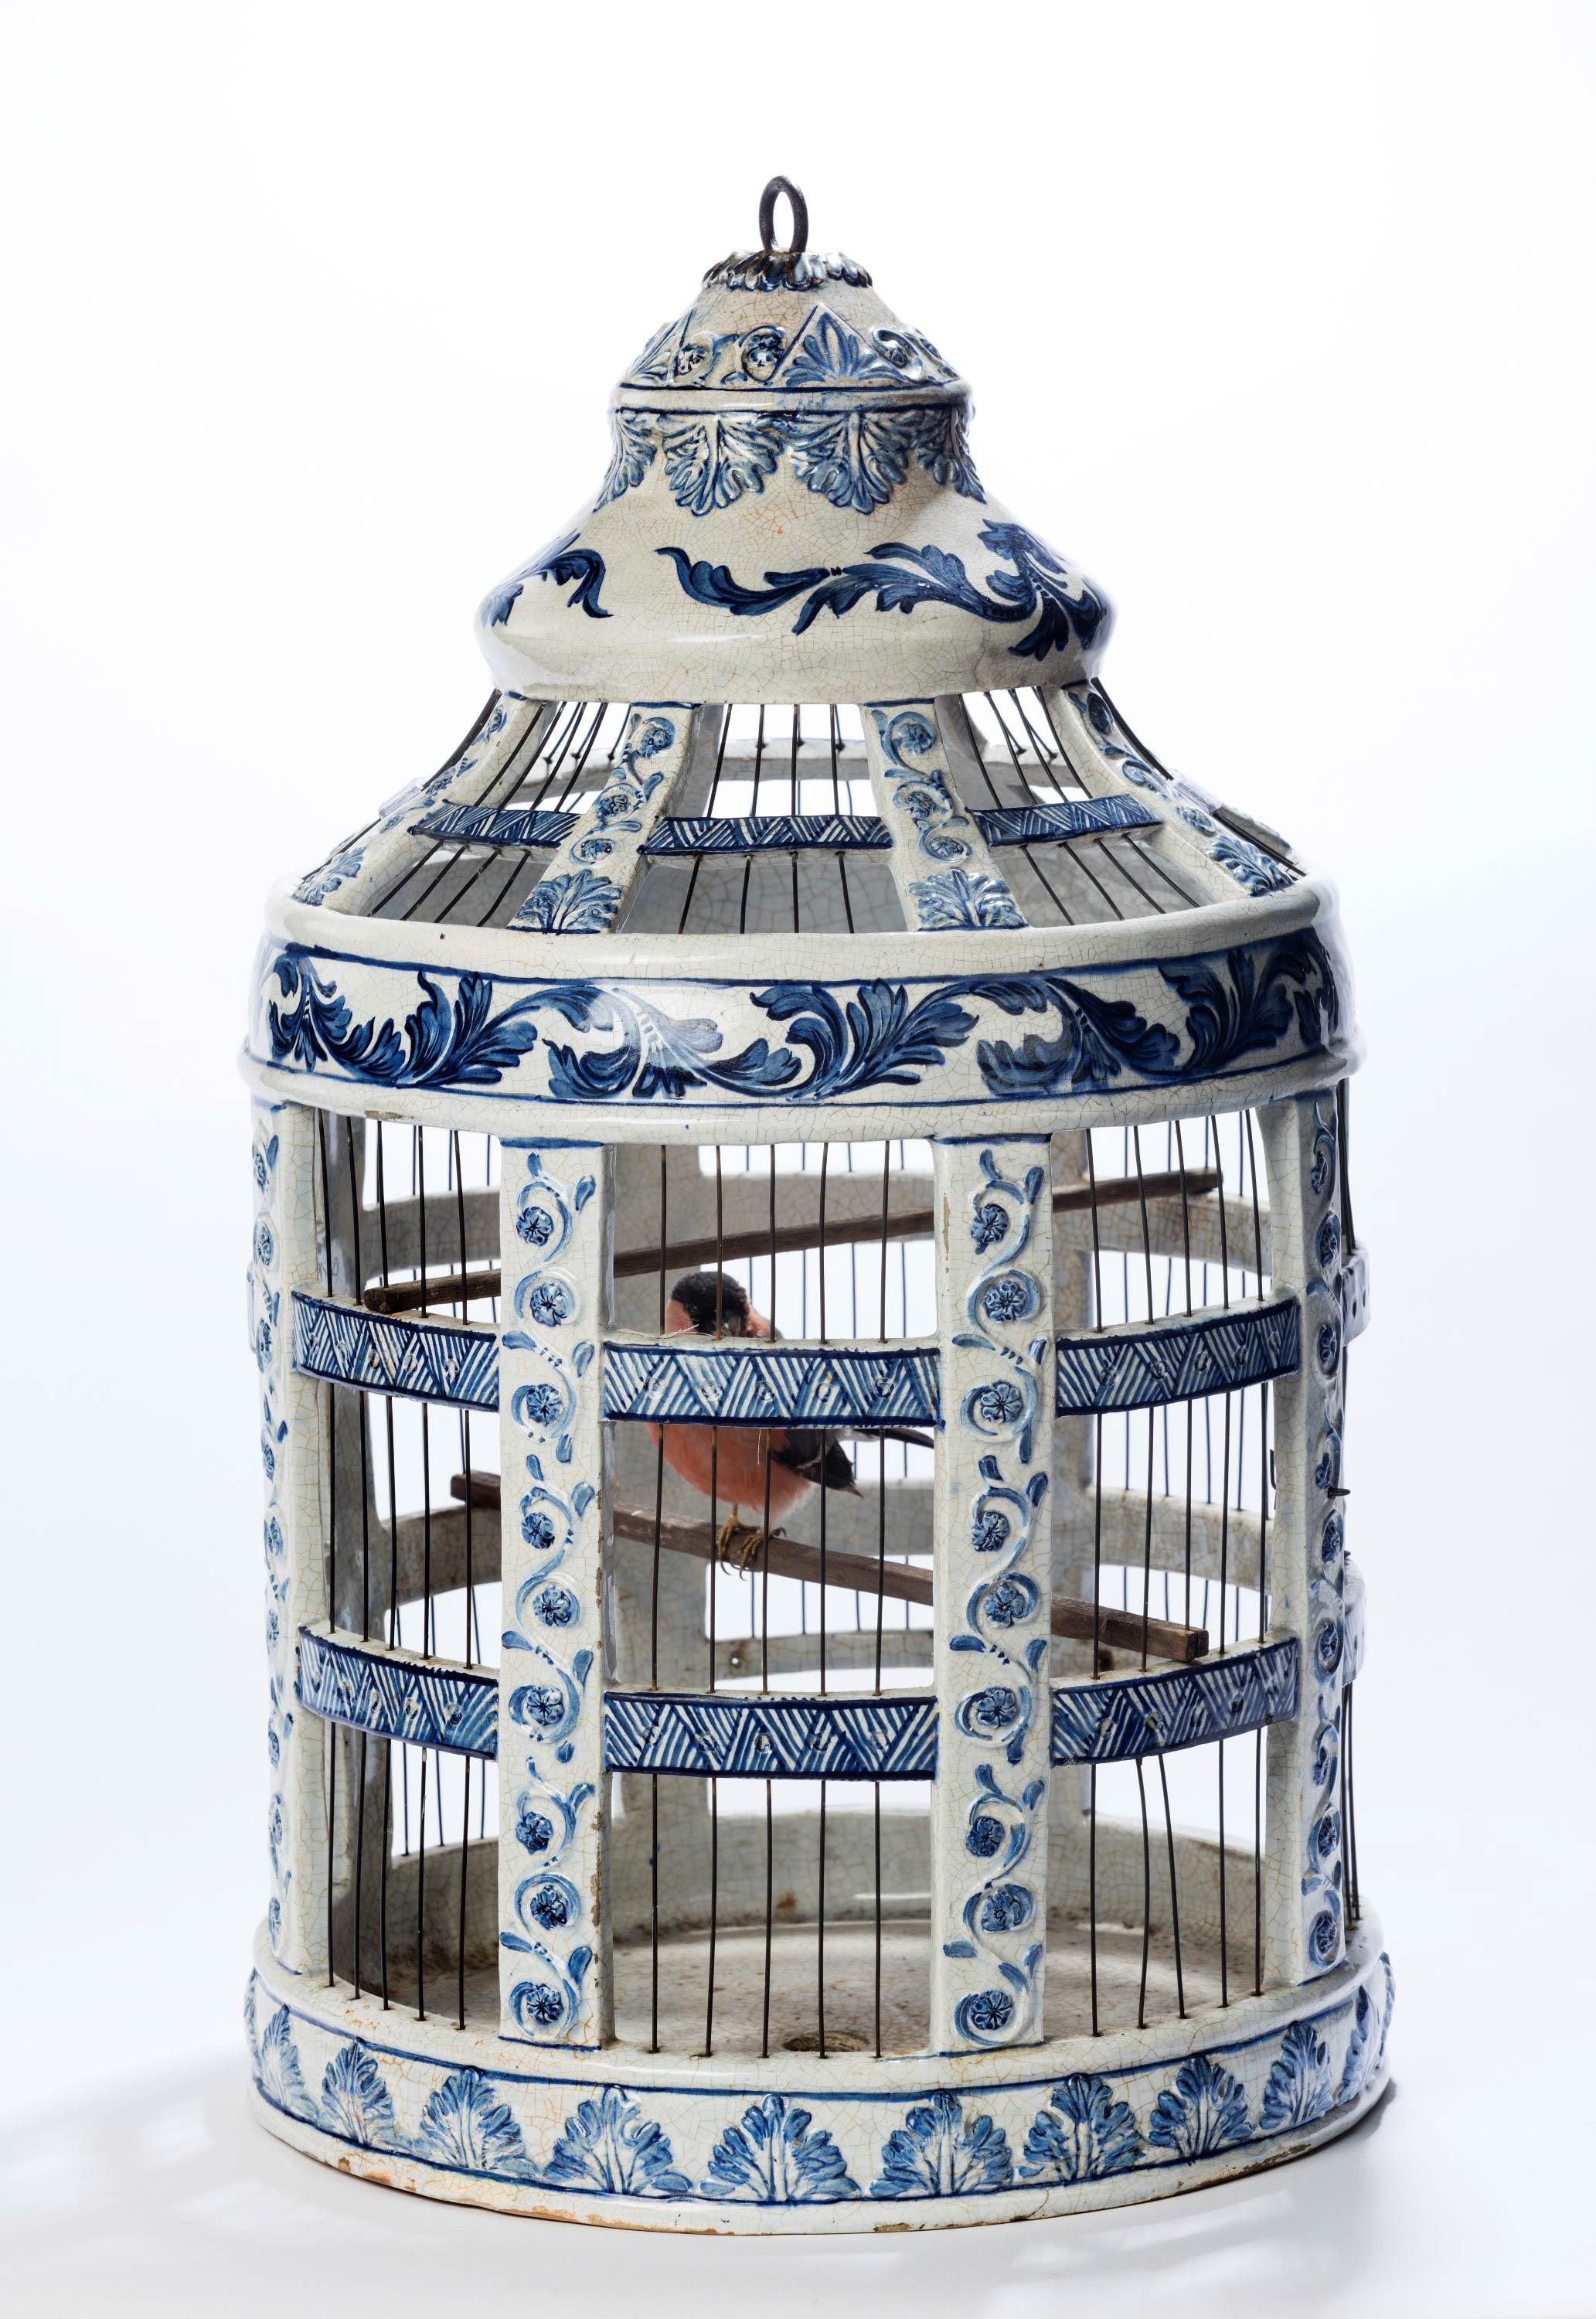 English Extremely Rare 18th Century Dutch, Delft, Blue and White Birdcage